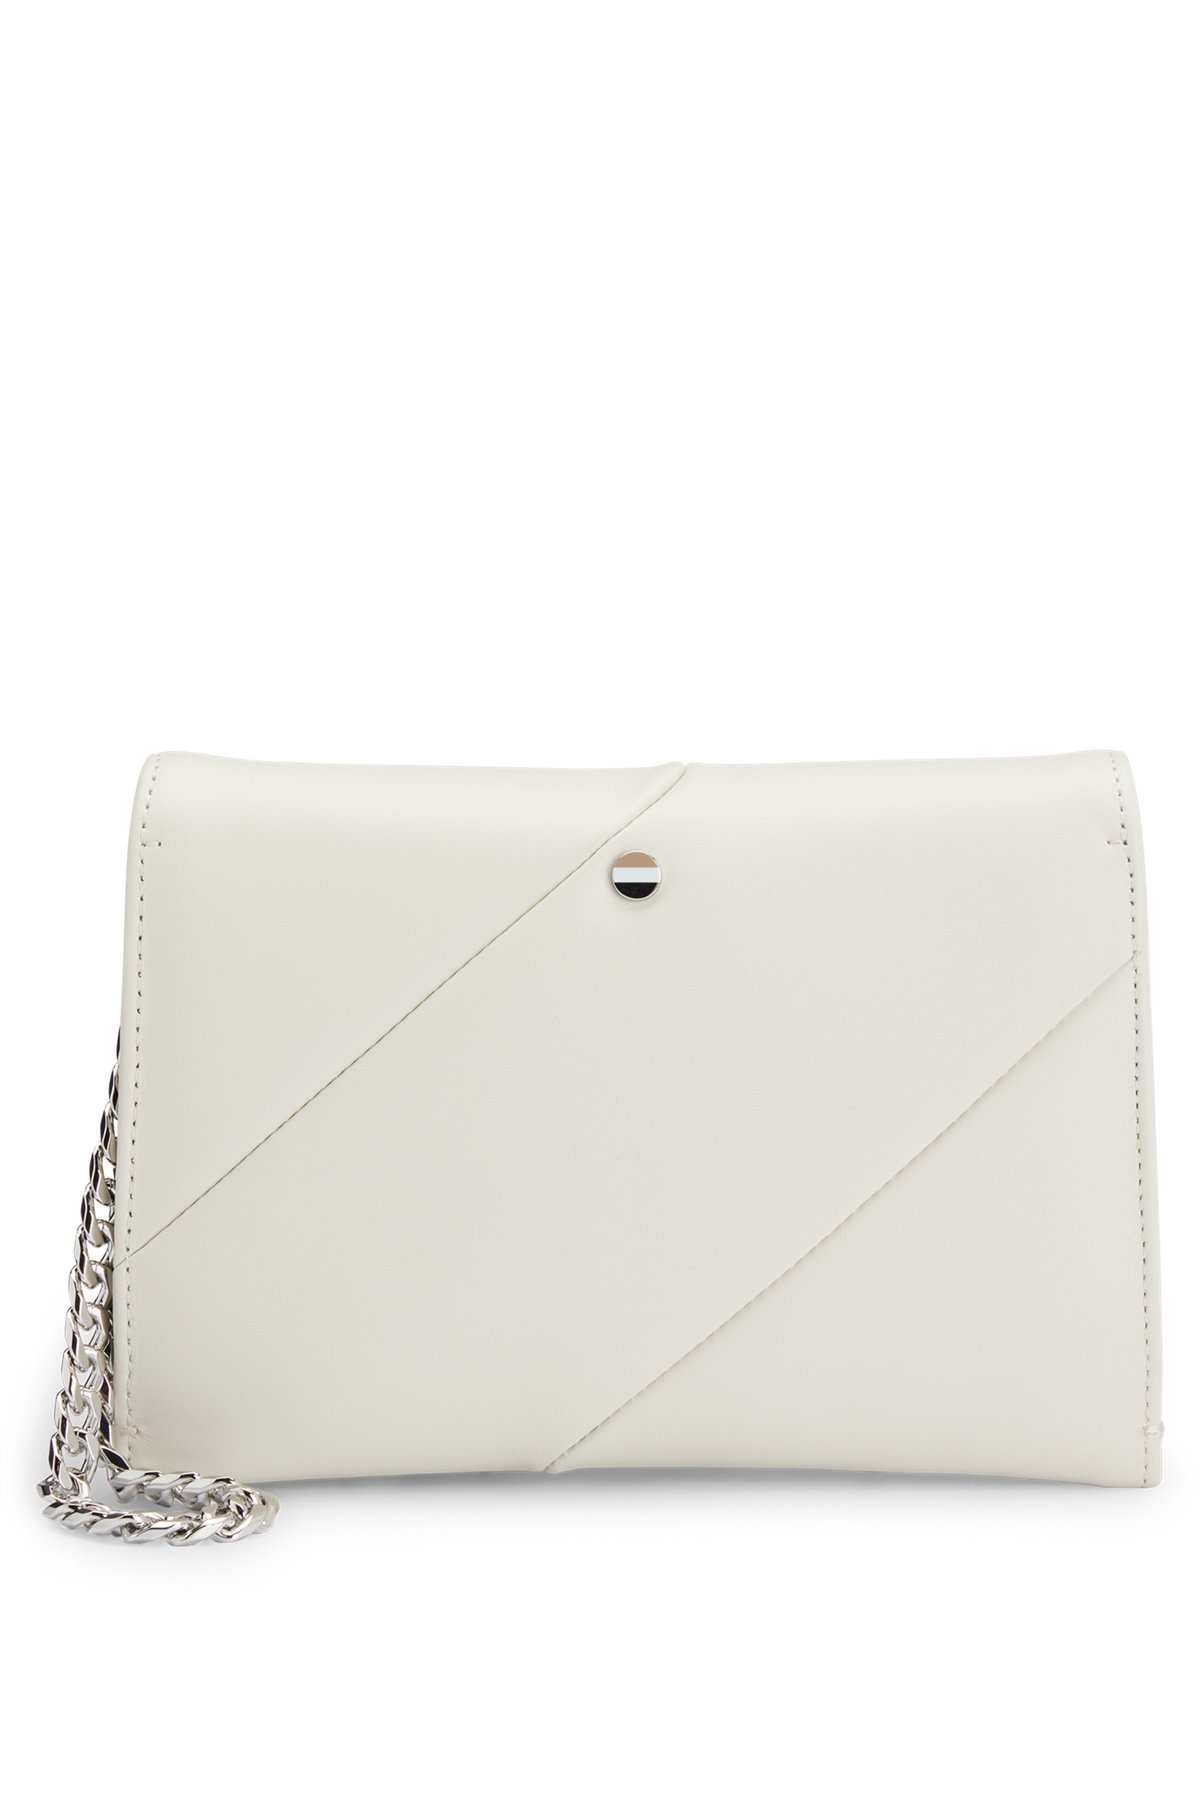 Grained-leather clutch bag with logo lettering, White